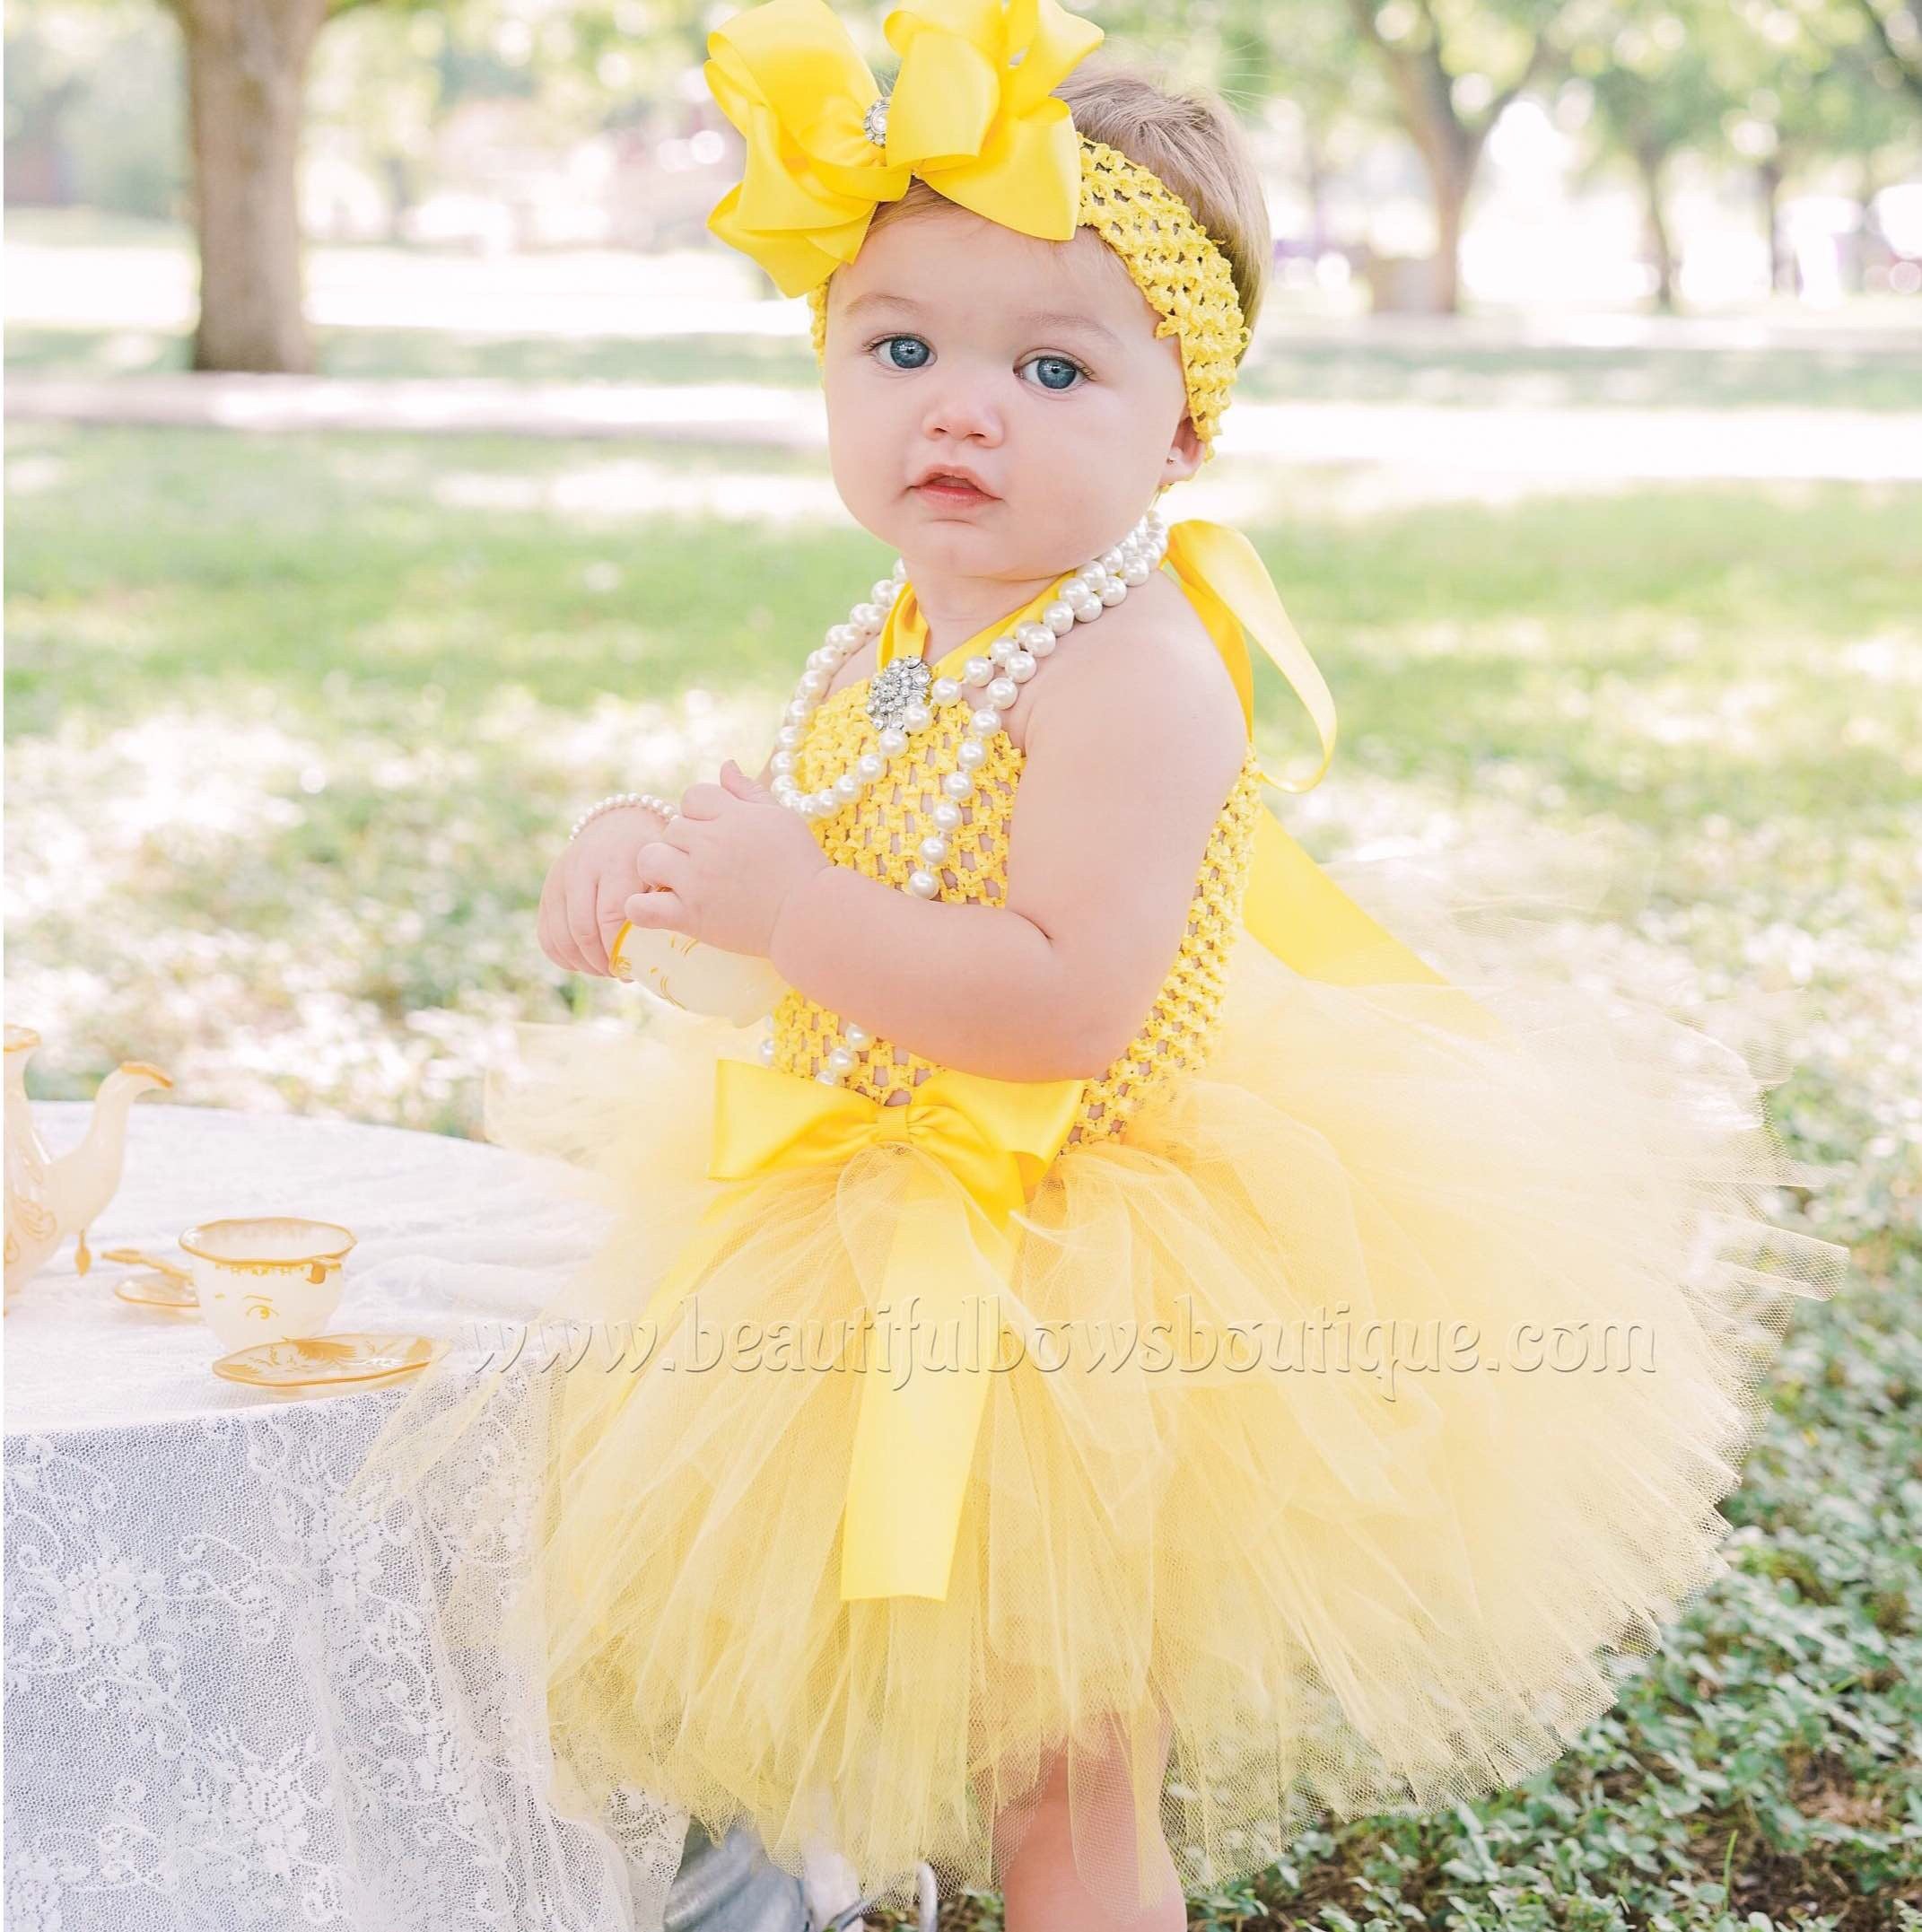 Baby girl in yellow dress Wallpapers Download | MobCup